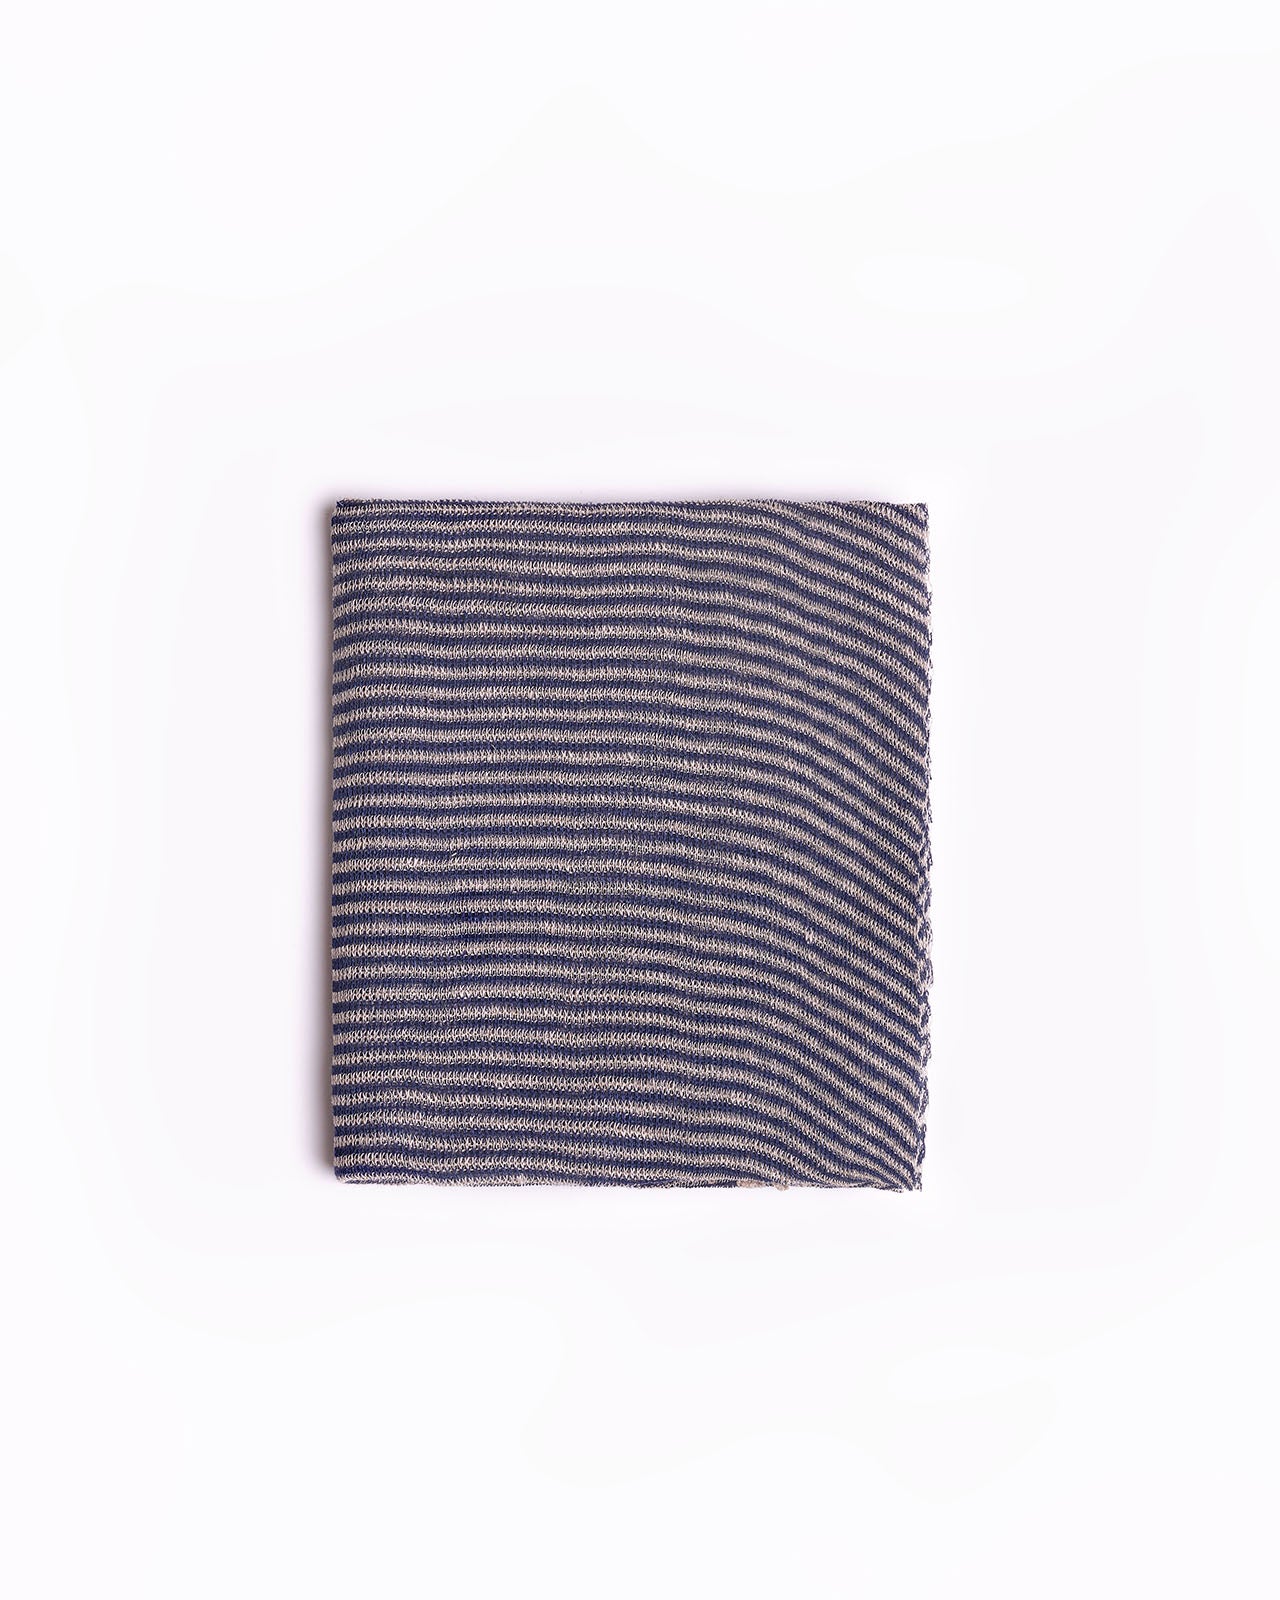 High-quality navy blue striped scarf folded neatly against a clean white background. This scarf features a classic striped design in shades of beige, ideal for adding a touch of elegance to any outfit. The soft fabric and neutral tones make it a versatile accessory for both casual and formal occasions. Perfect for those searching for timeless fashion pieces